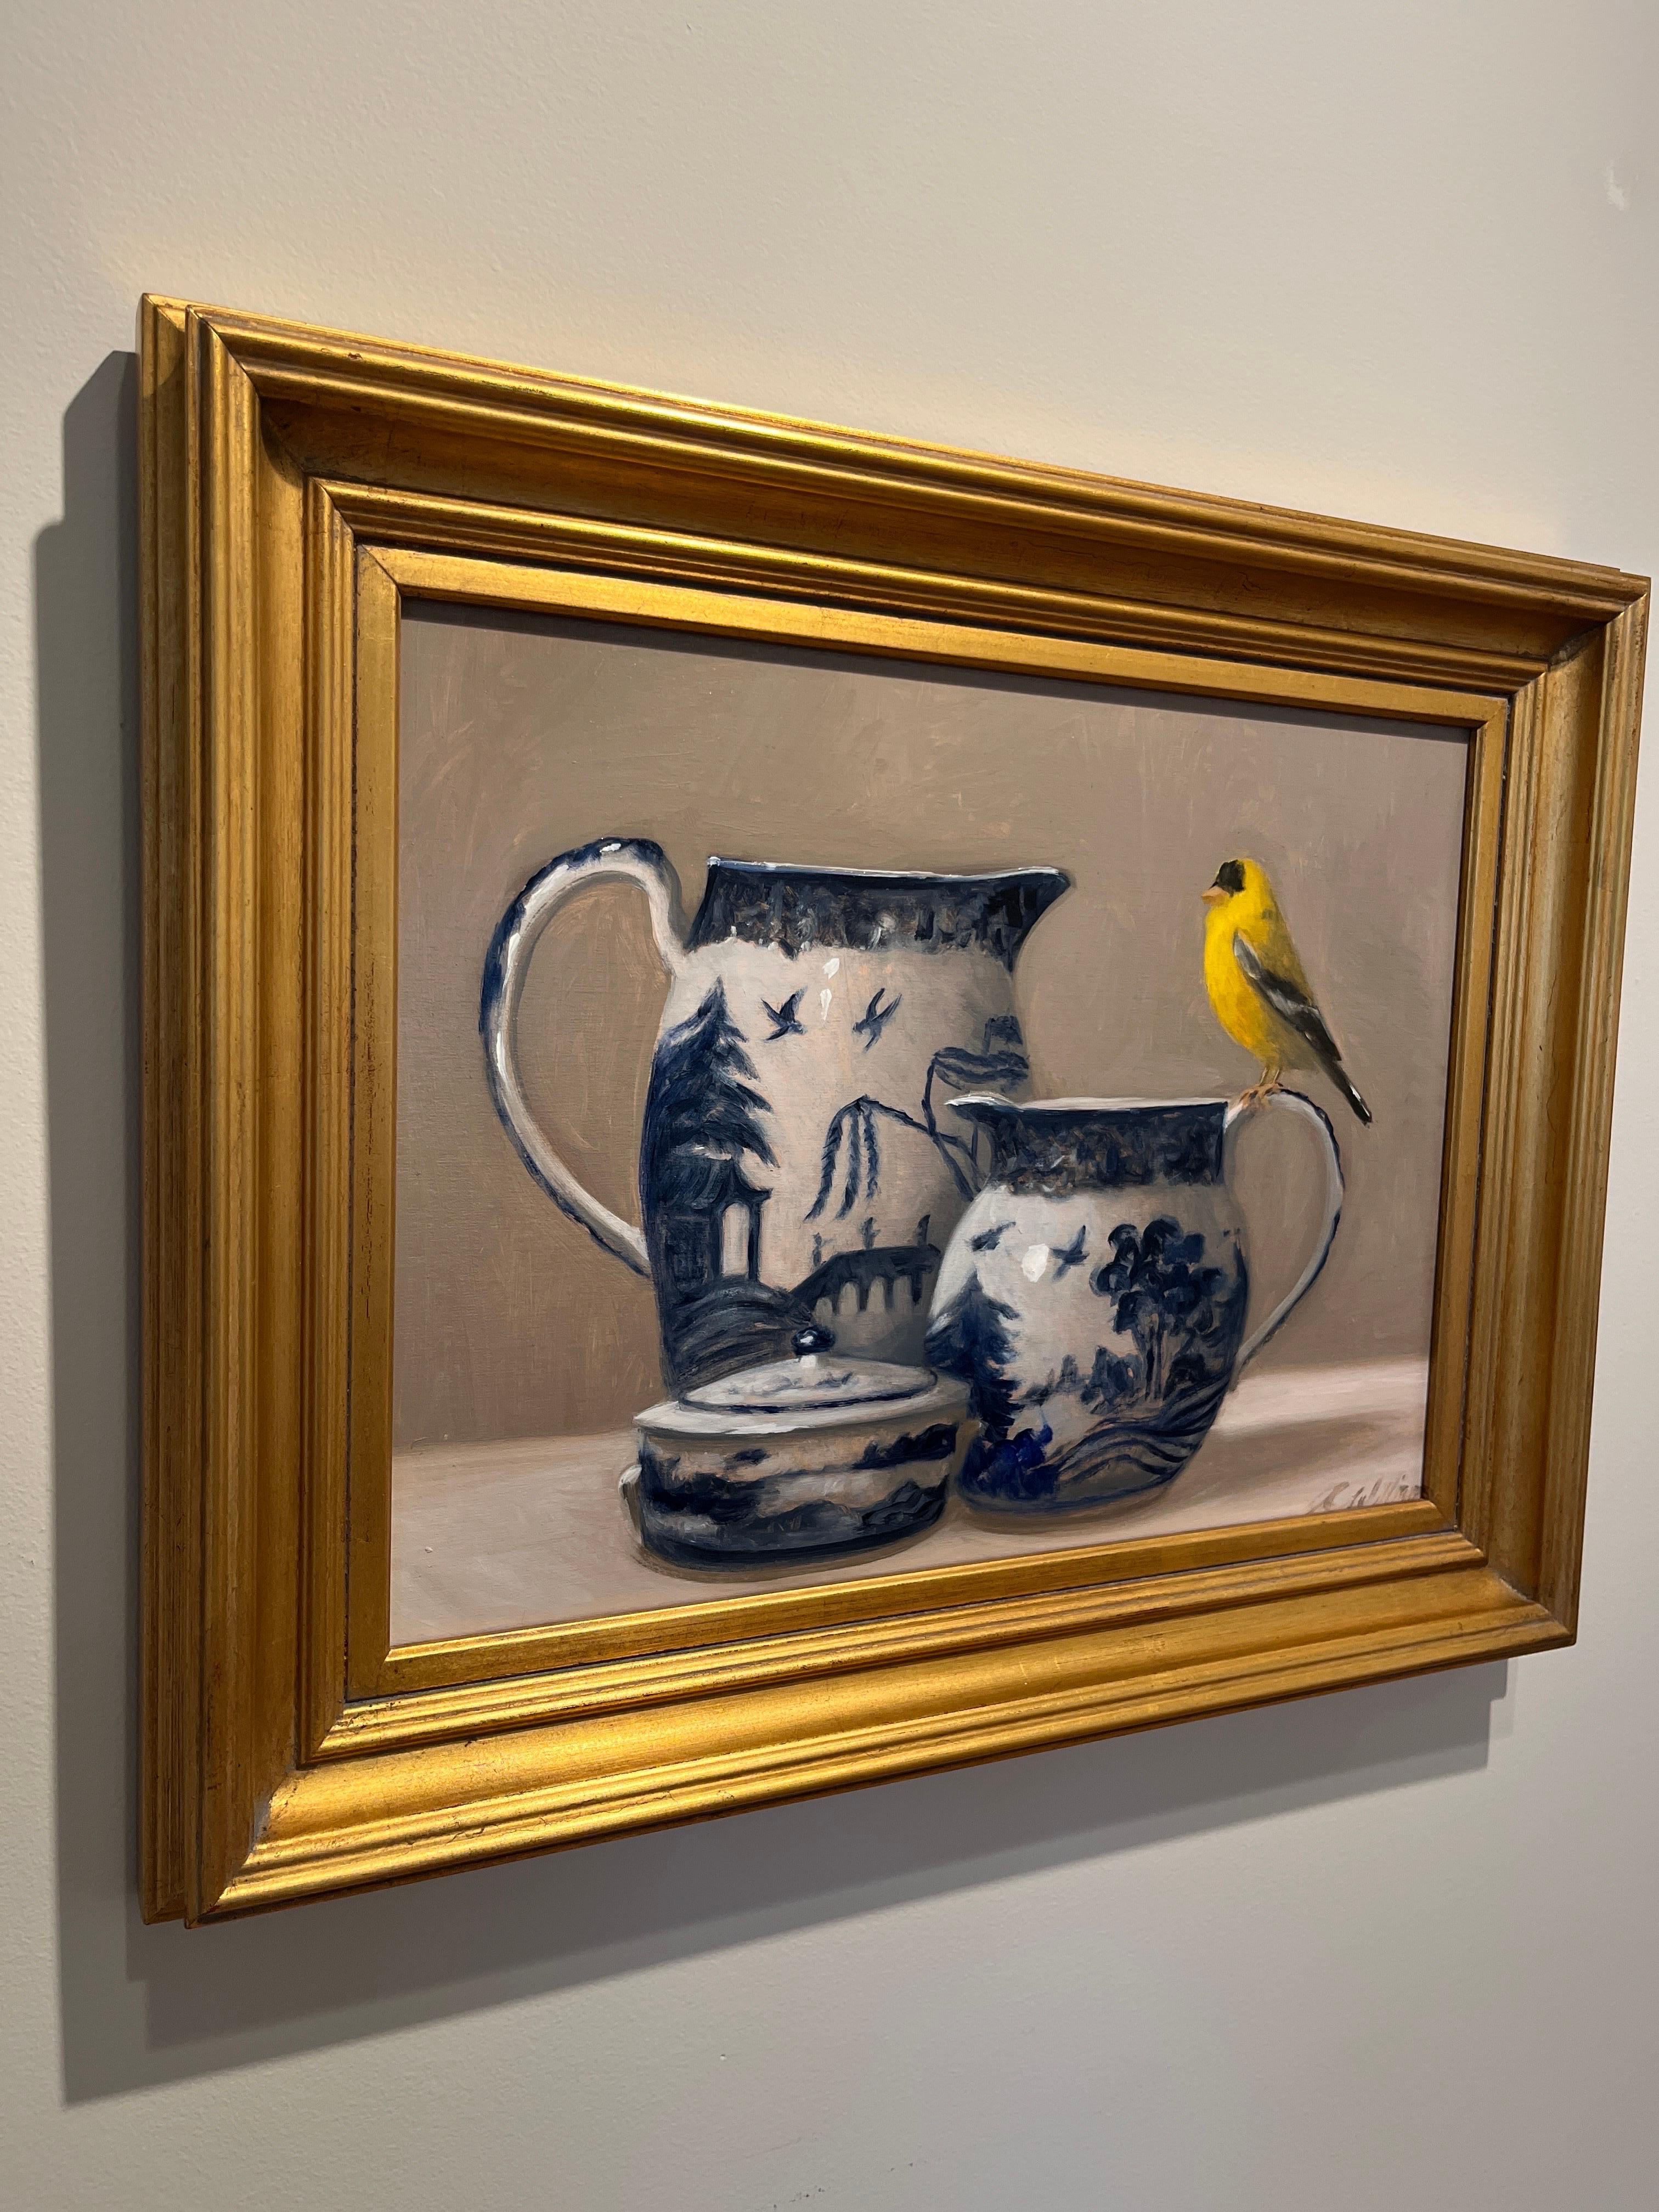 Still Life in Blue, White, and Gold - American Realist Painting by Ginny Williams